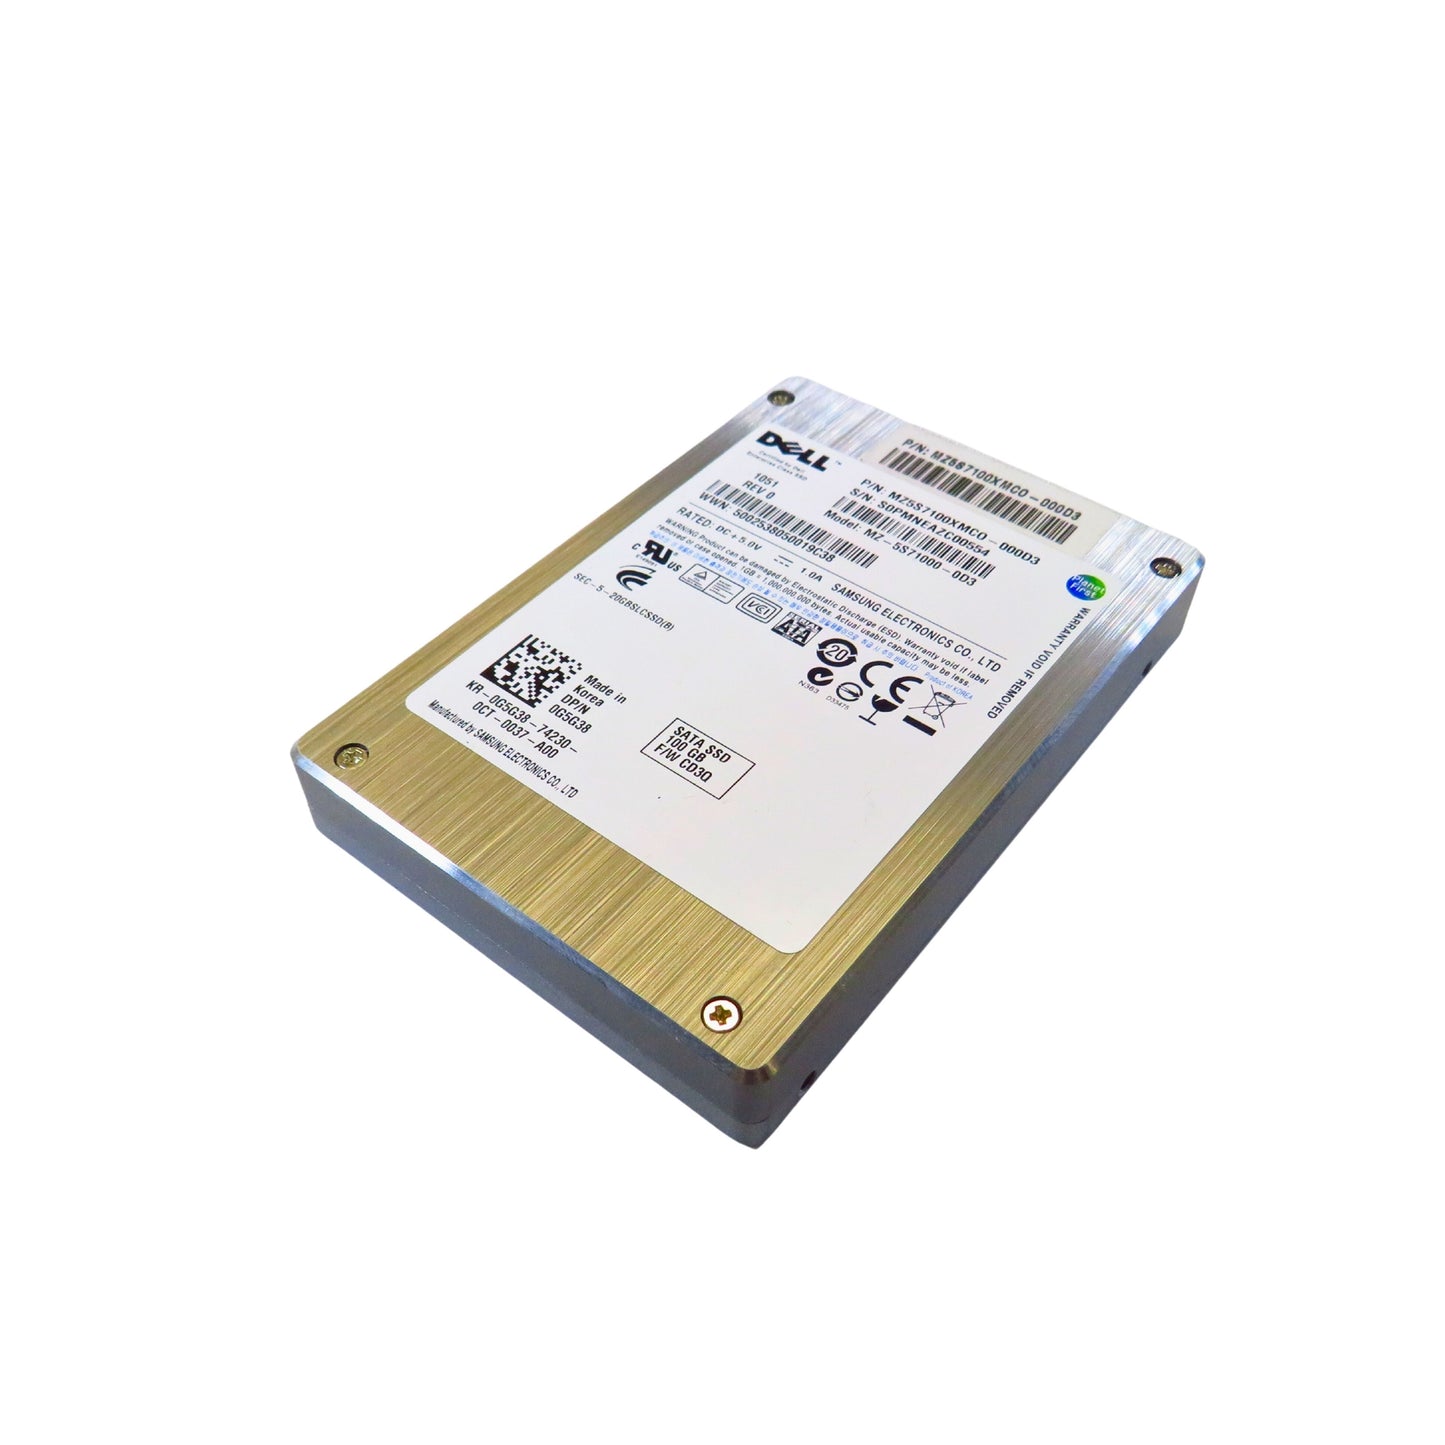 Dell G5G38 100GB 2.5" SATA 3Gbps SSD Solid State Drive (Refurbished)